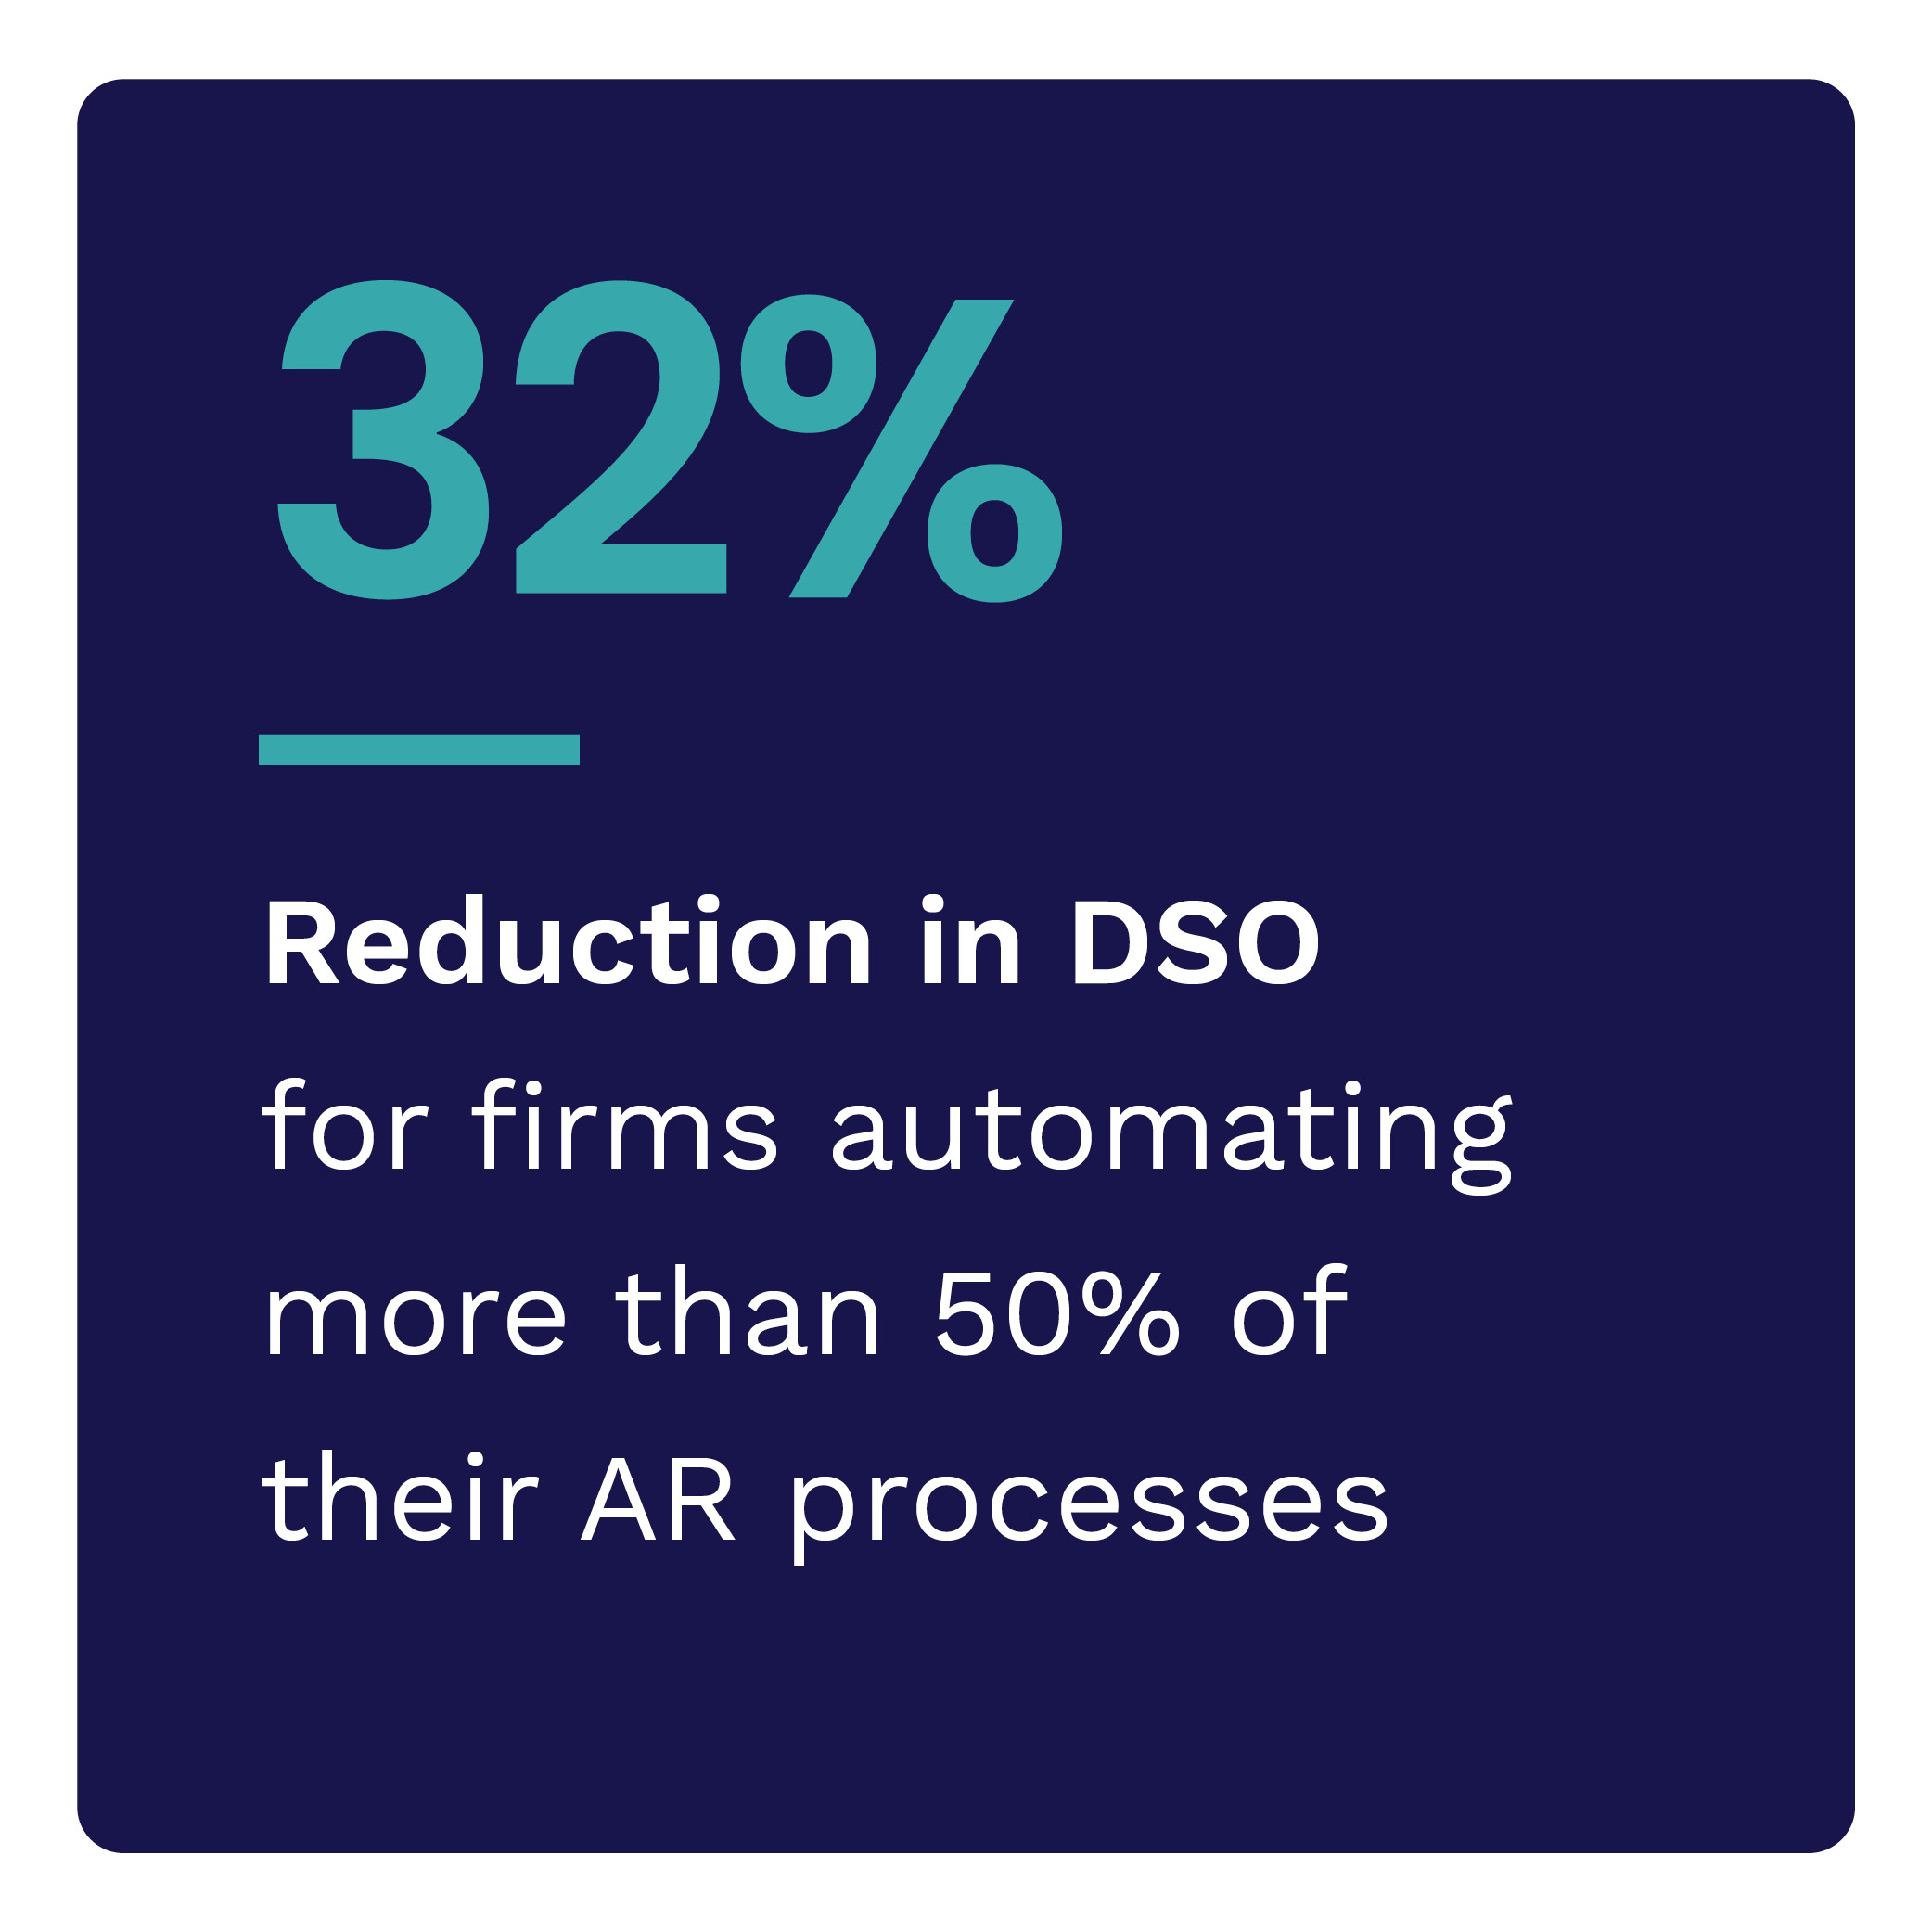 32%: Reduction in DSO for firms automating over 50% of their AR processes